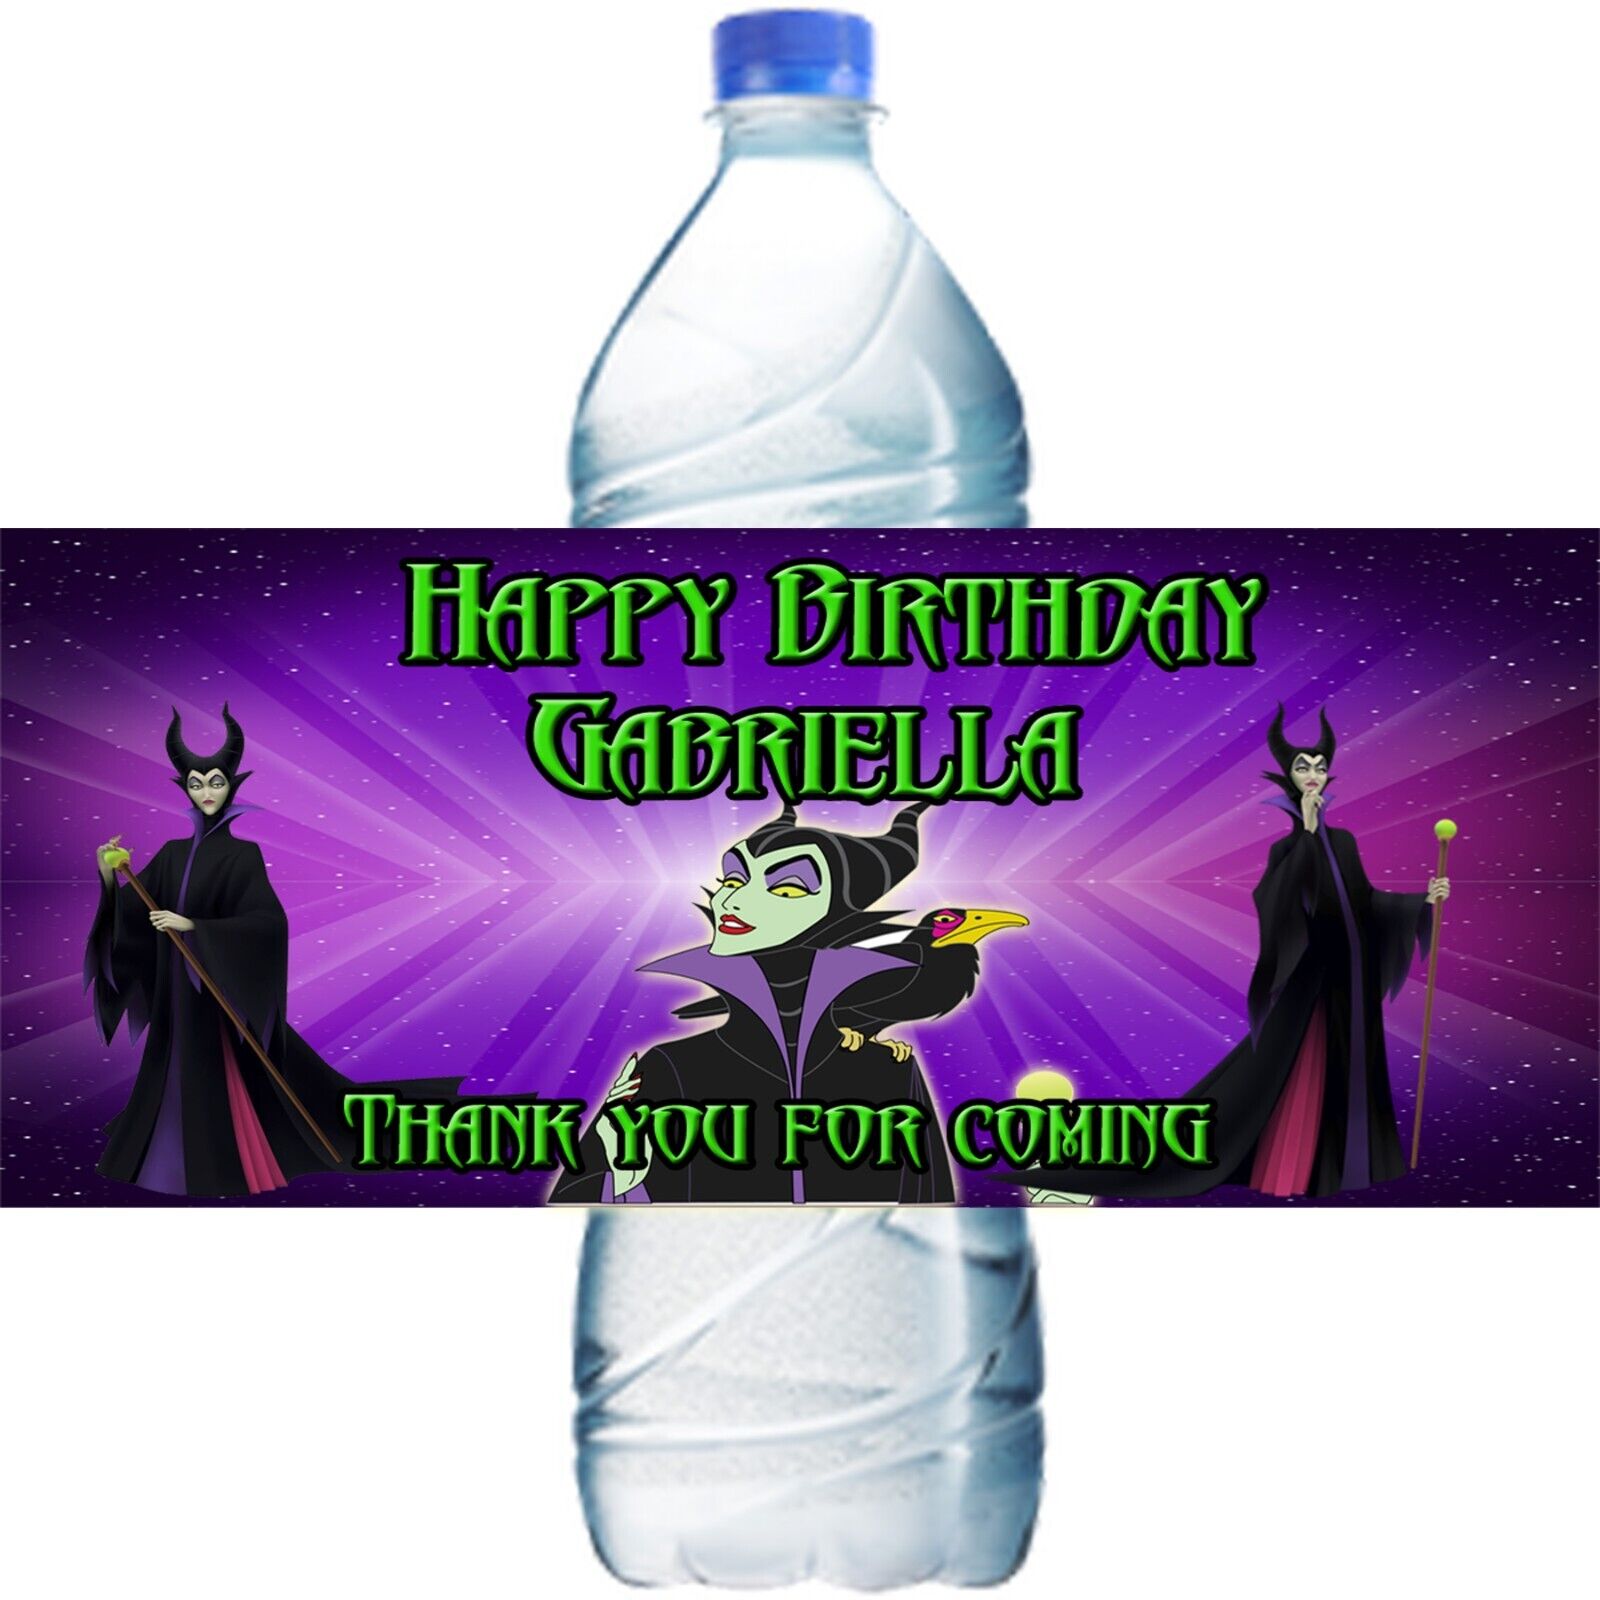 (10) Personalized DISNEY'S MALEFICENT Glossy Water Bottle Labels, Party Favors, 2 Sizes